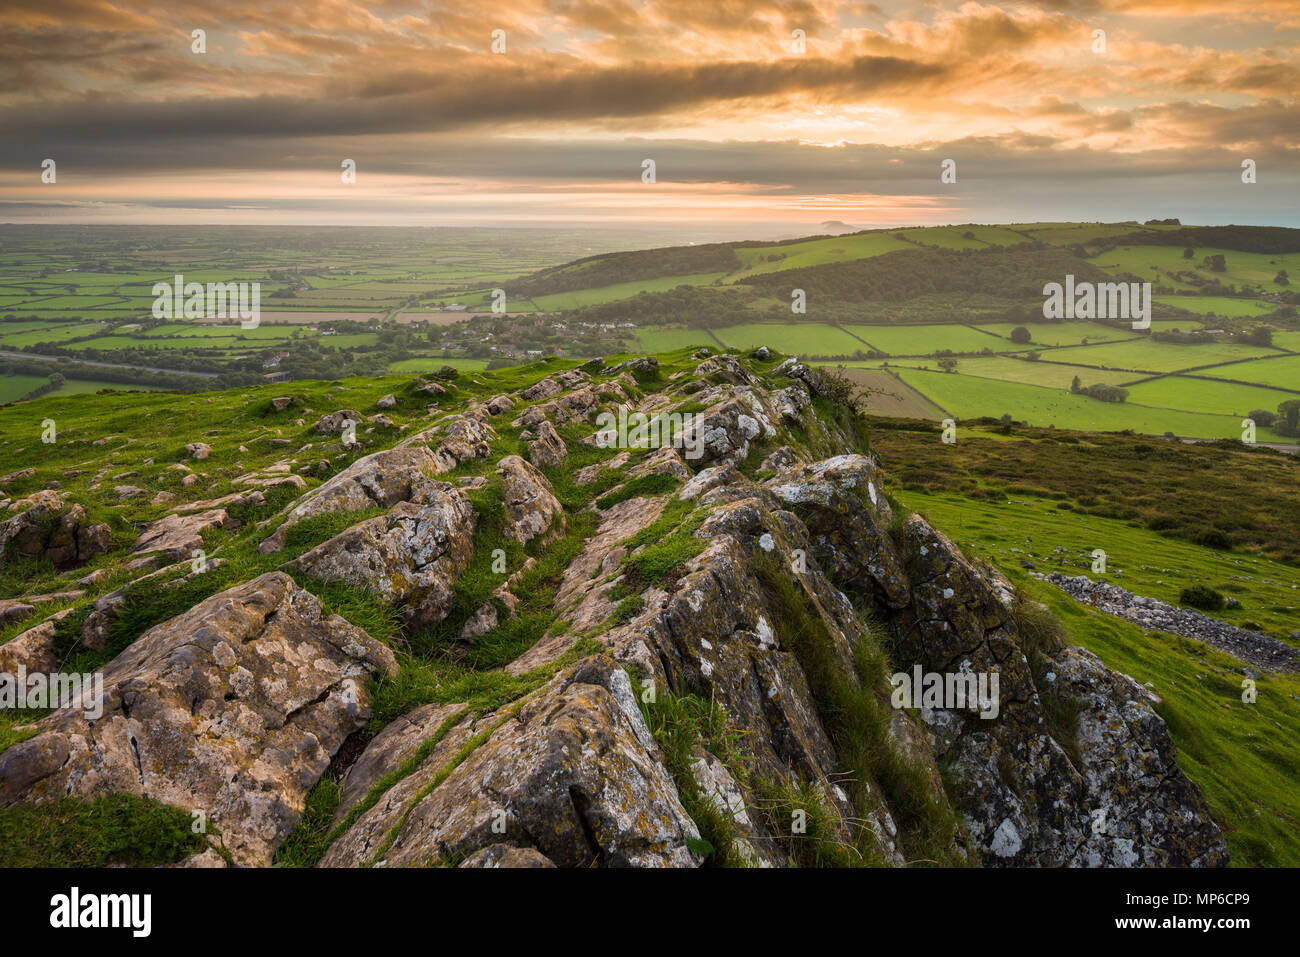 The limescale outcrop at Crook Peak on the Mendip Hills near Compton Bishop, Somerset, England. Stock Photo